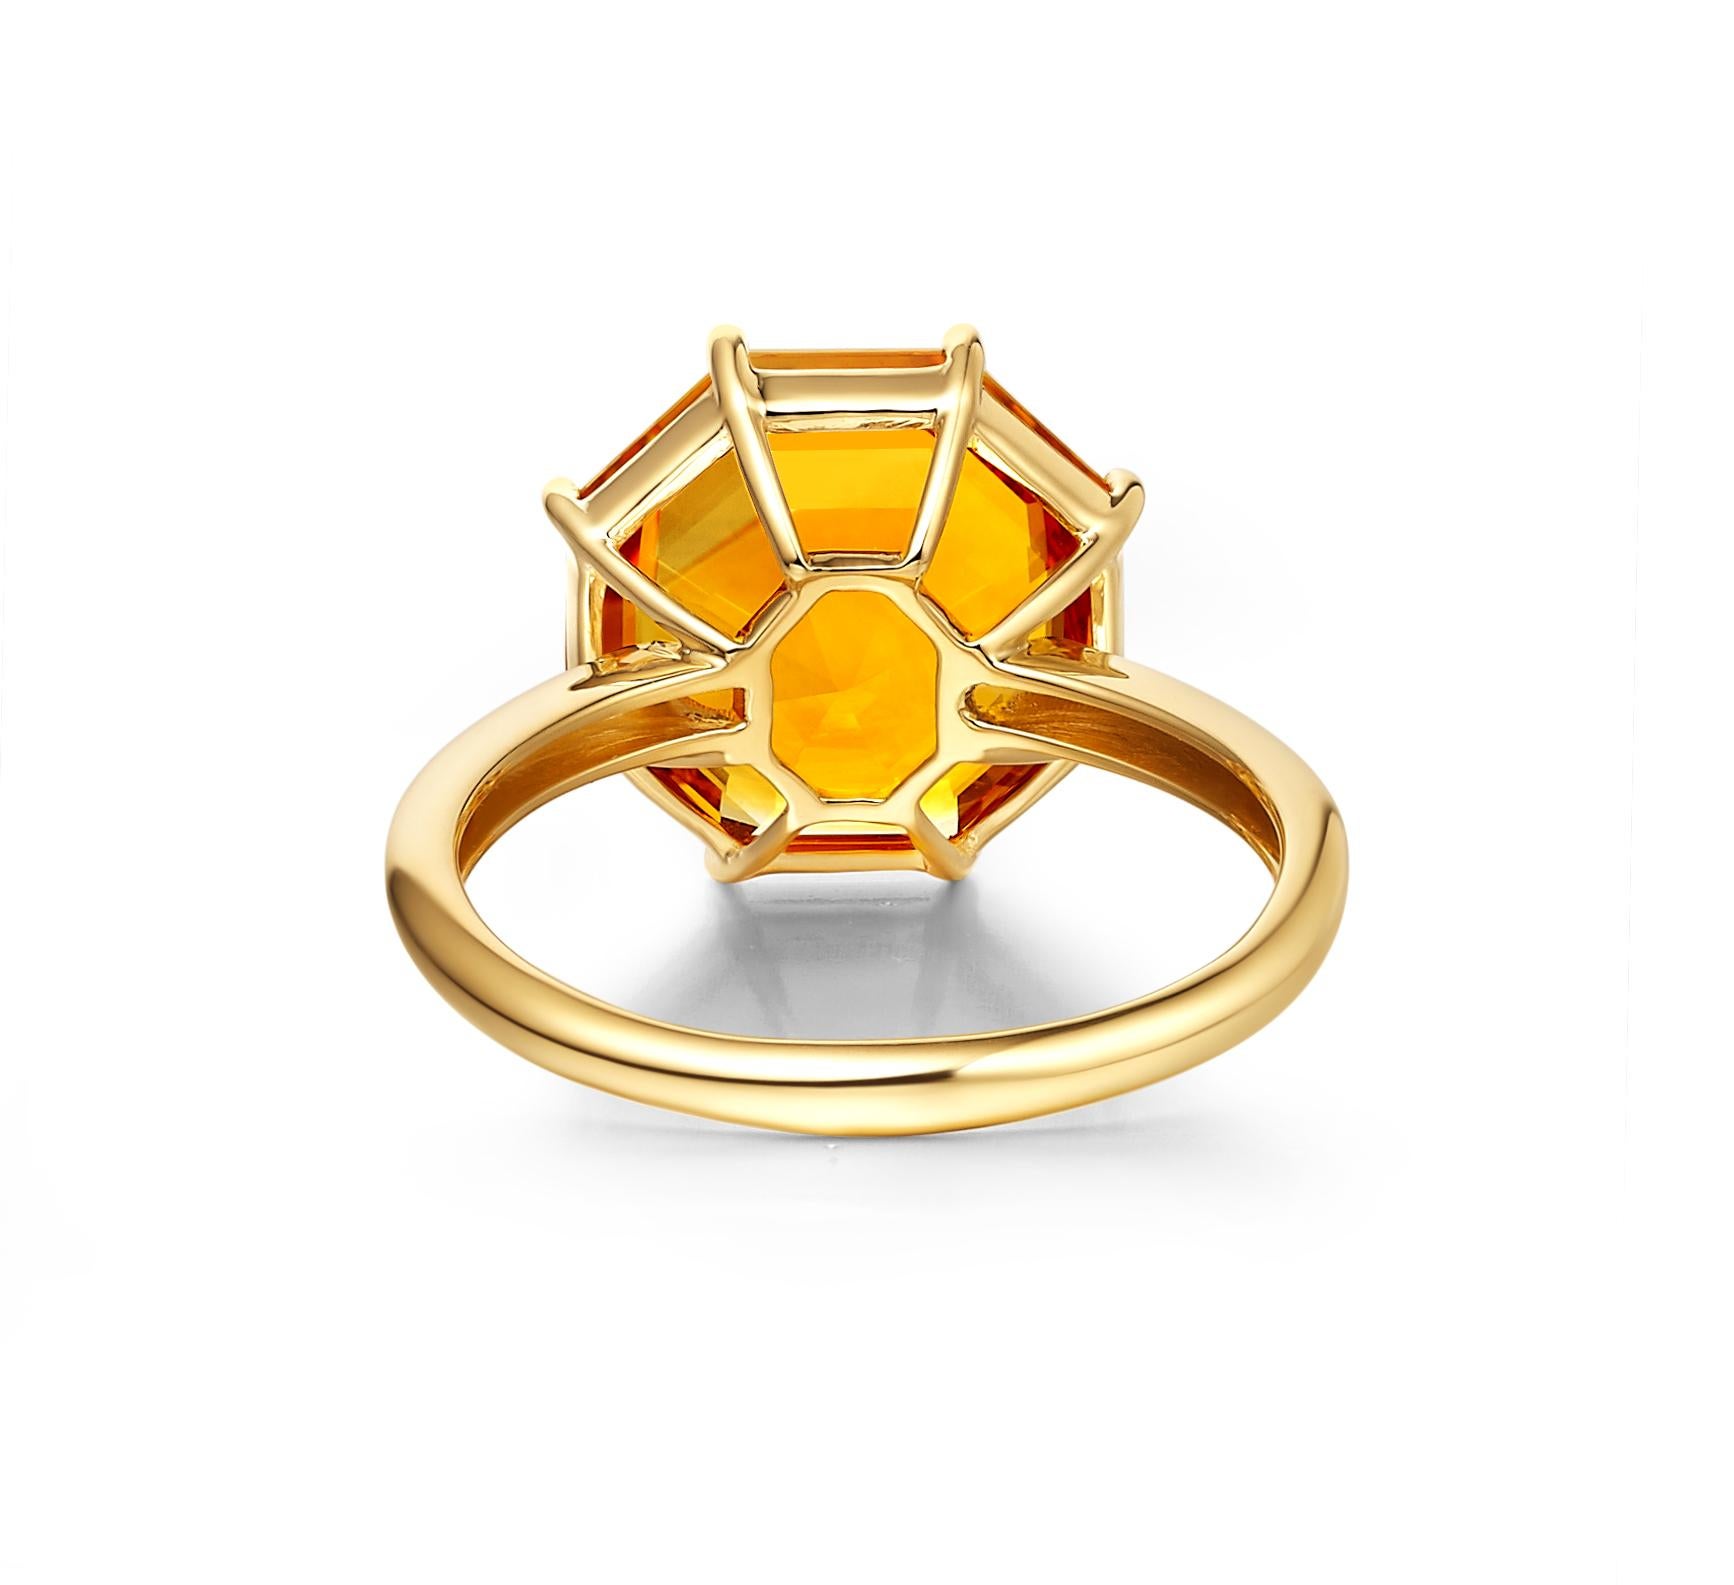 Description:
Victoriana octagon ring with 5ct citrine set in 18ct yellow gold.

Inspiration:
A deluxe 18ct gold collection inspired by Victorian design. Fei Liu’s Victoriana collection comprises of vibrant step-cut stones, that combined with the